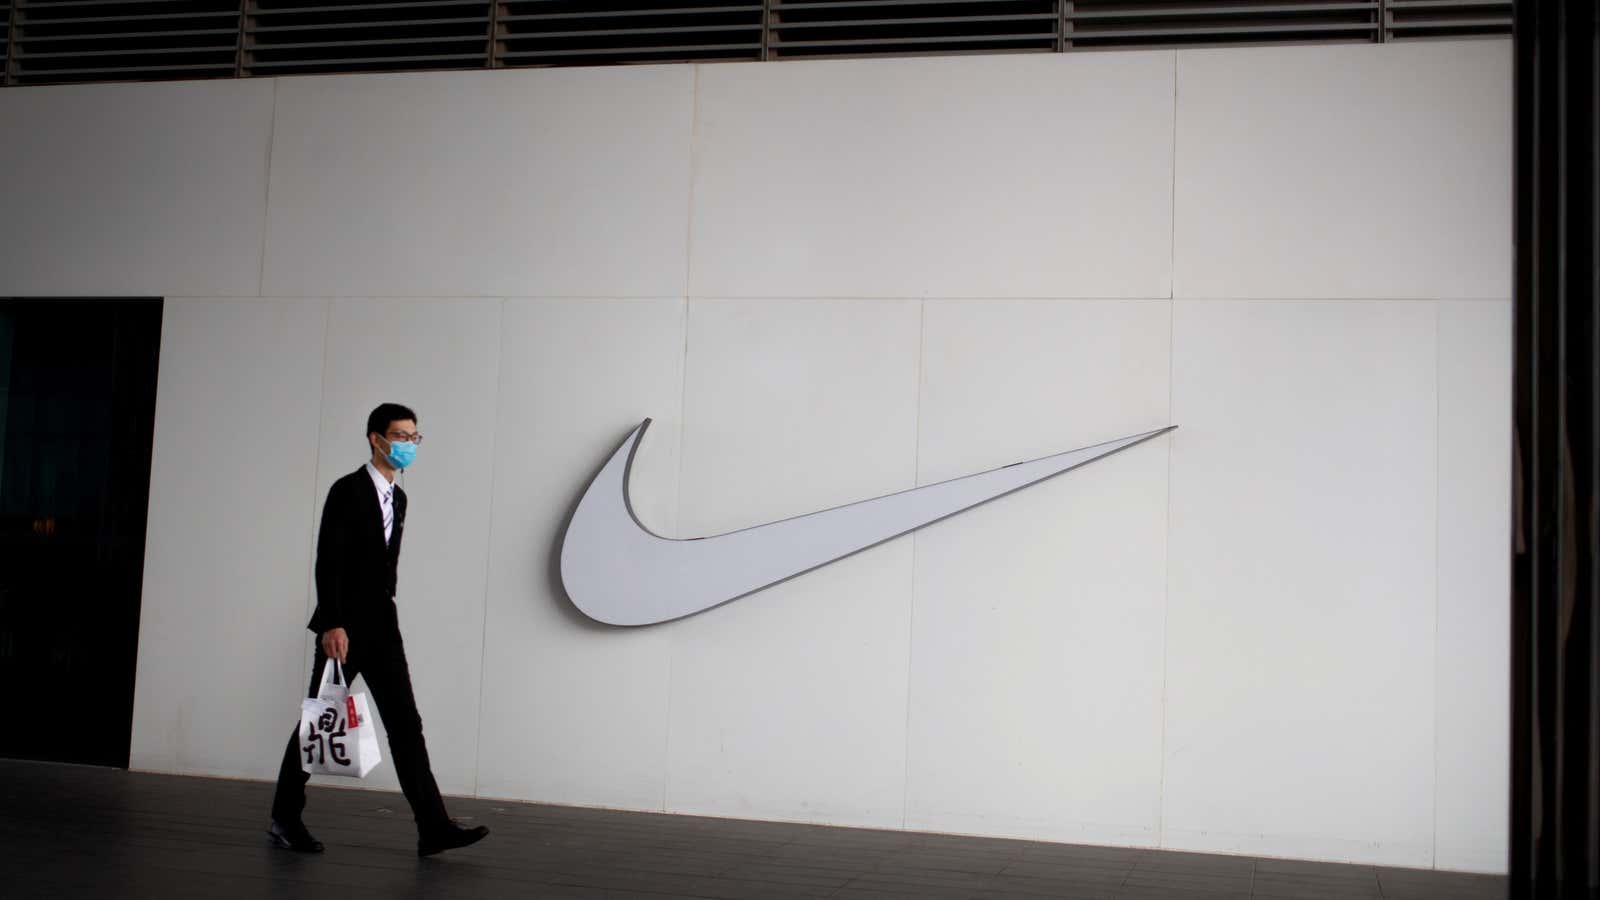 Nike faces an online backlash in China over its stance on forced labor.